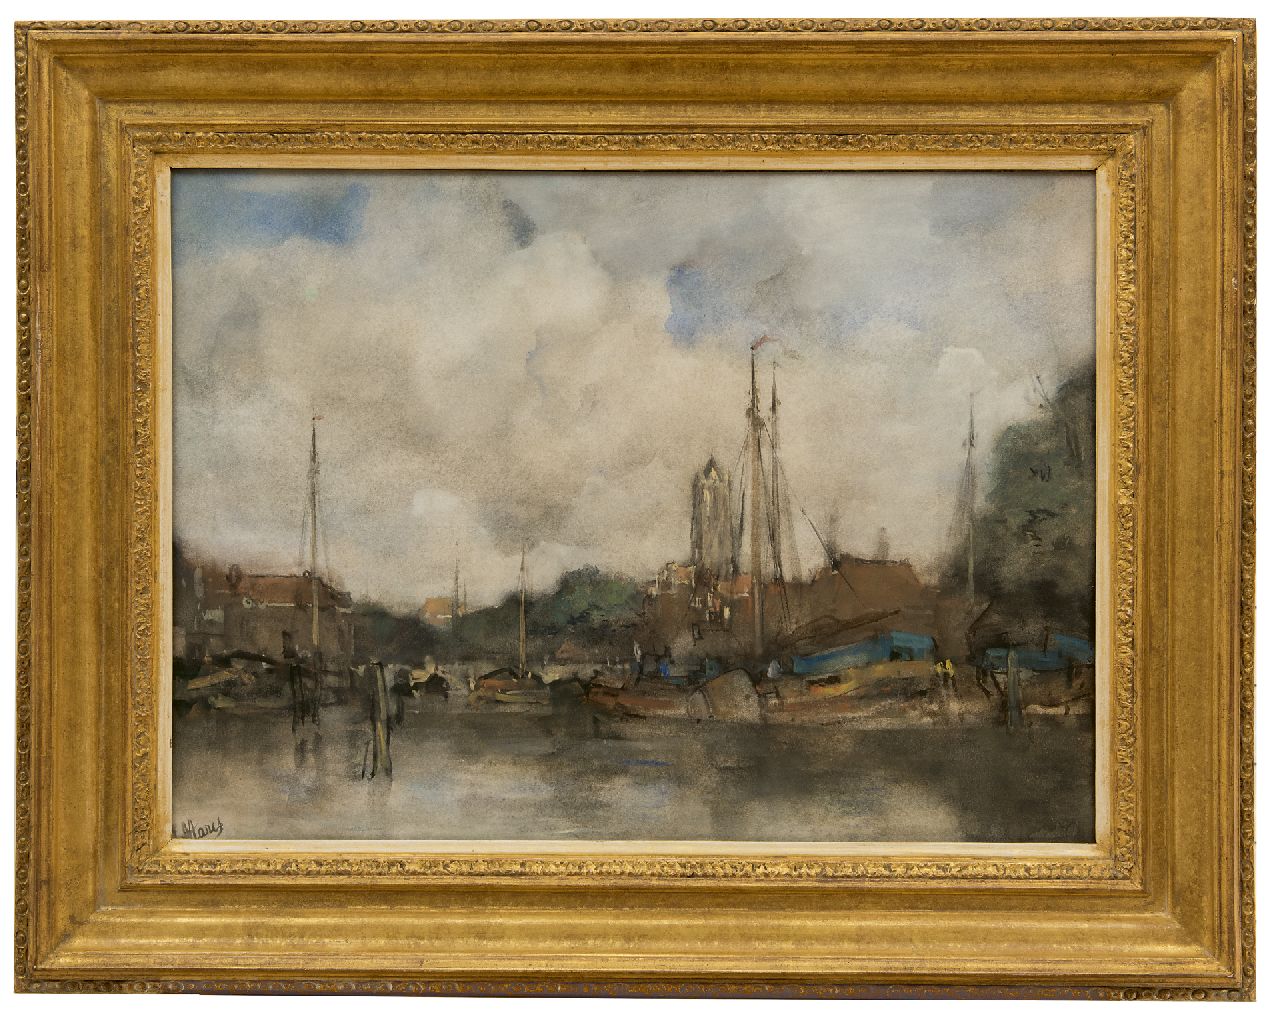 Maris J.H.  | Jacobus Hendricus 'Jacob' Maris | Watercolours and drawings offered for sale | A view of the inner harbour of  Utrecht and the Dom tower, watercolour on paper 42.0 x 57.4 cm, signed l.l.